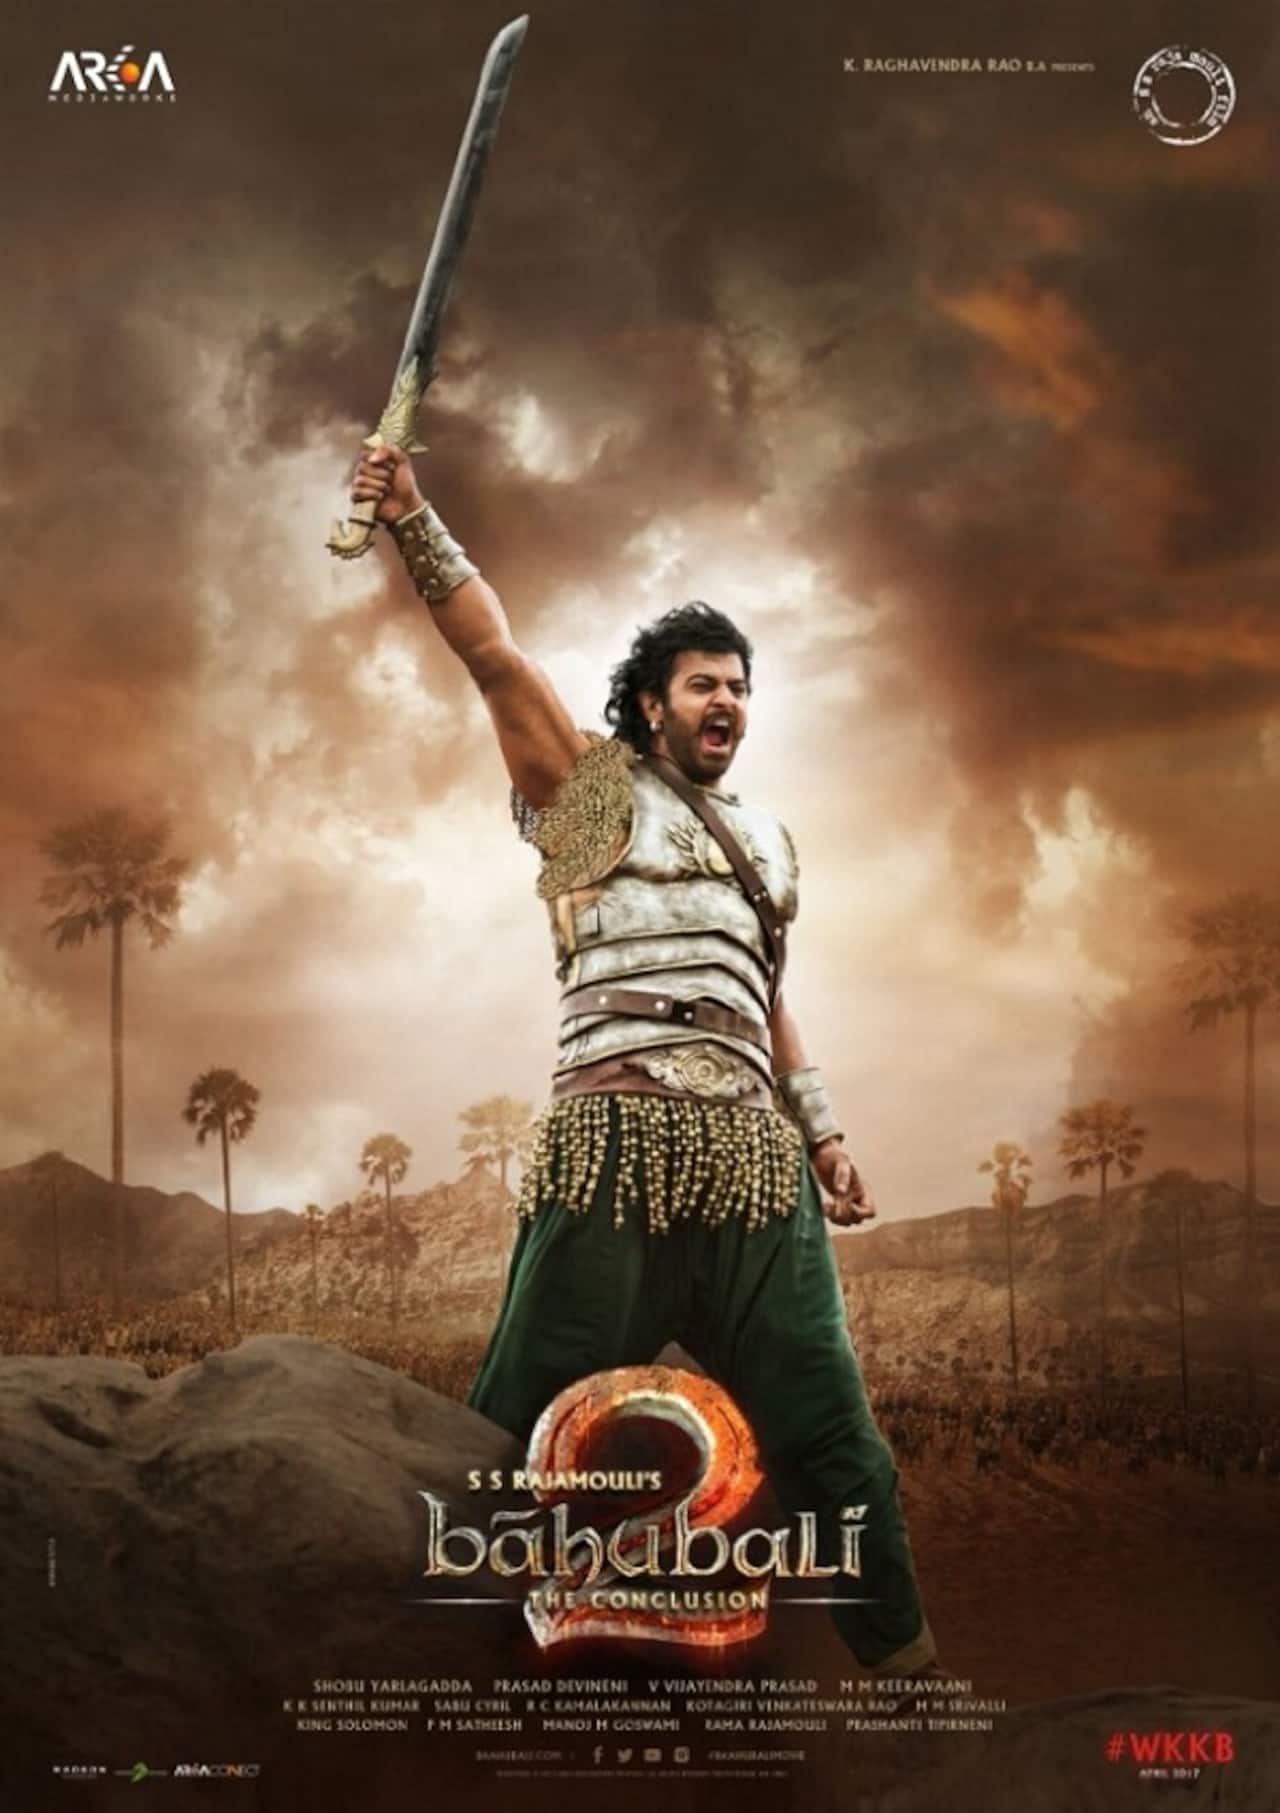 After Nepal, Baahubali 2 now declared a hit in Pakistan - Bollywood News  & Gossip, Movie Reviews, Trailers & Videos at 